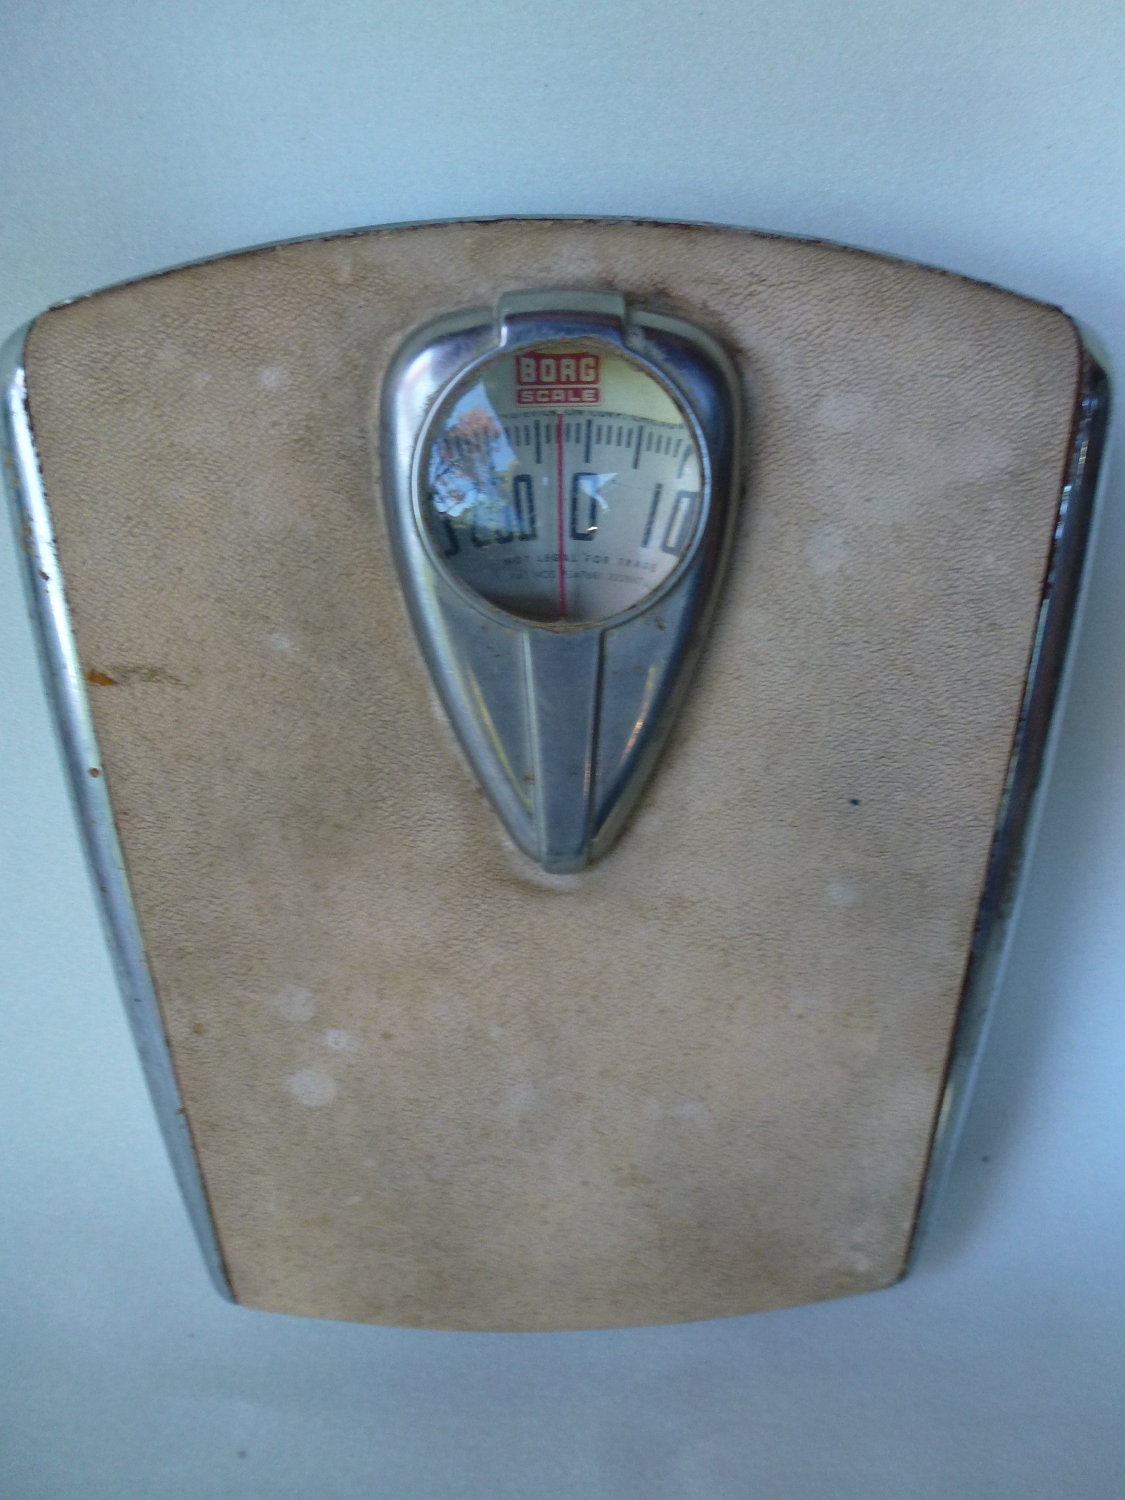 Vintage Borg Bathroom Scale Old School Scale Antique Scale